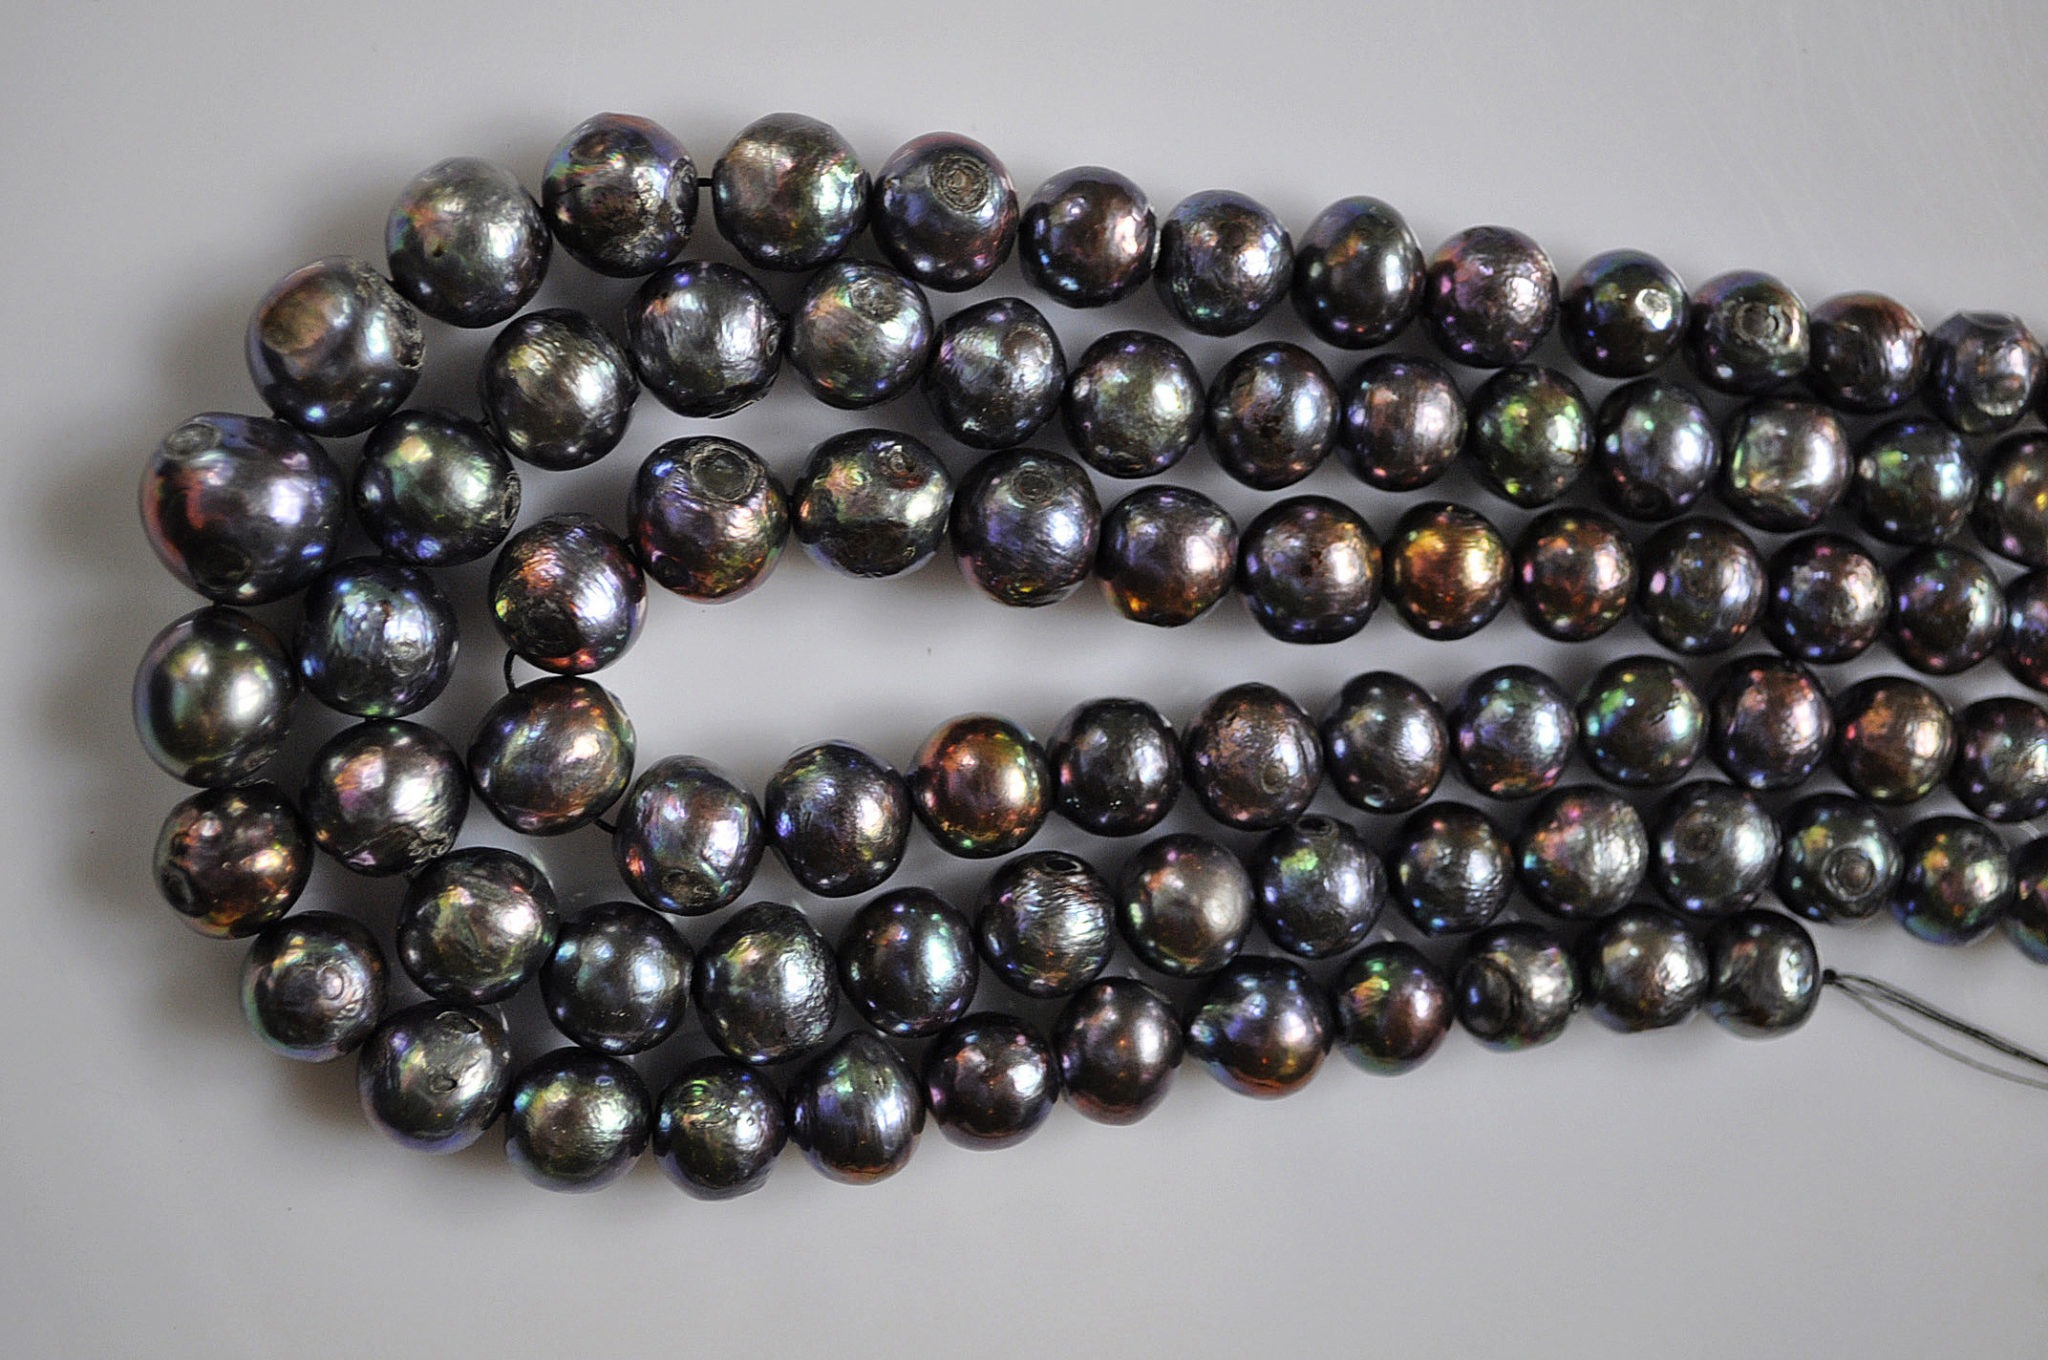 12-14MM DYED FRESHWATER CULTURED PEARLS